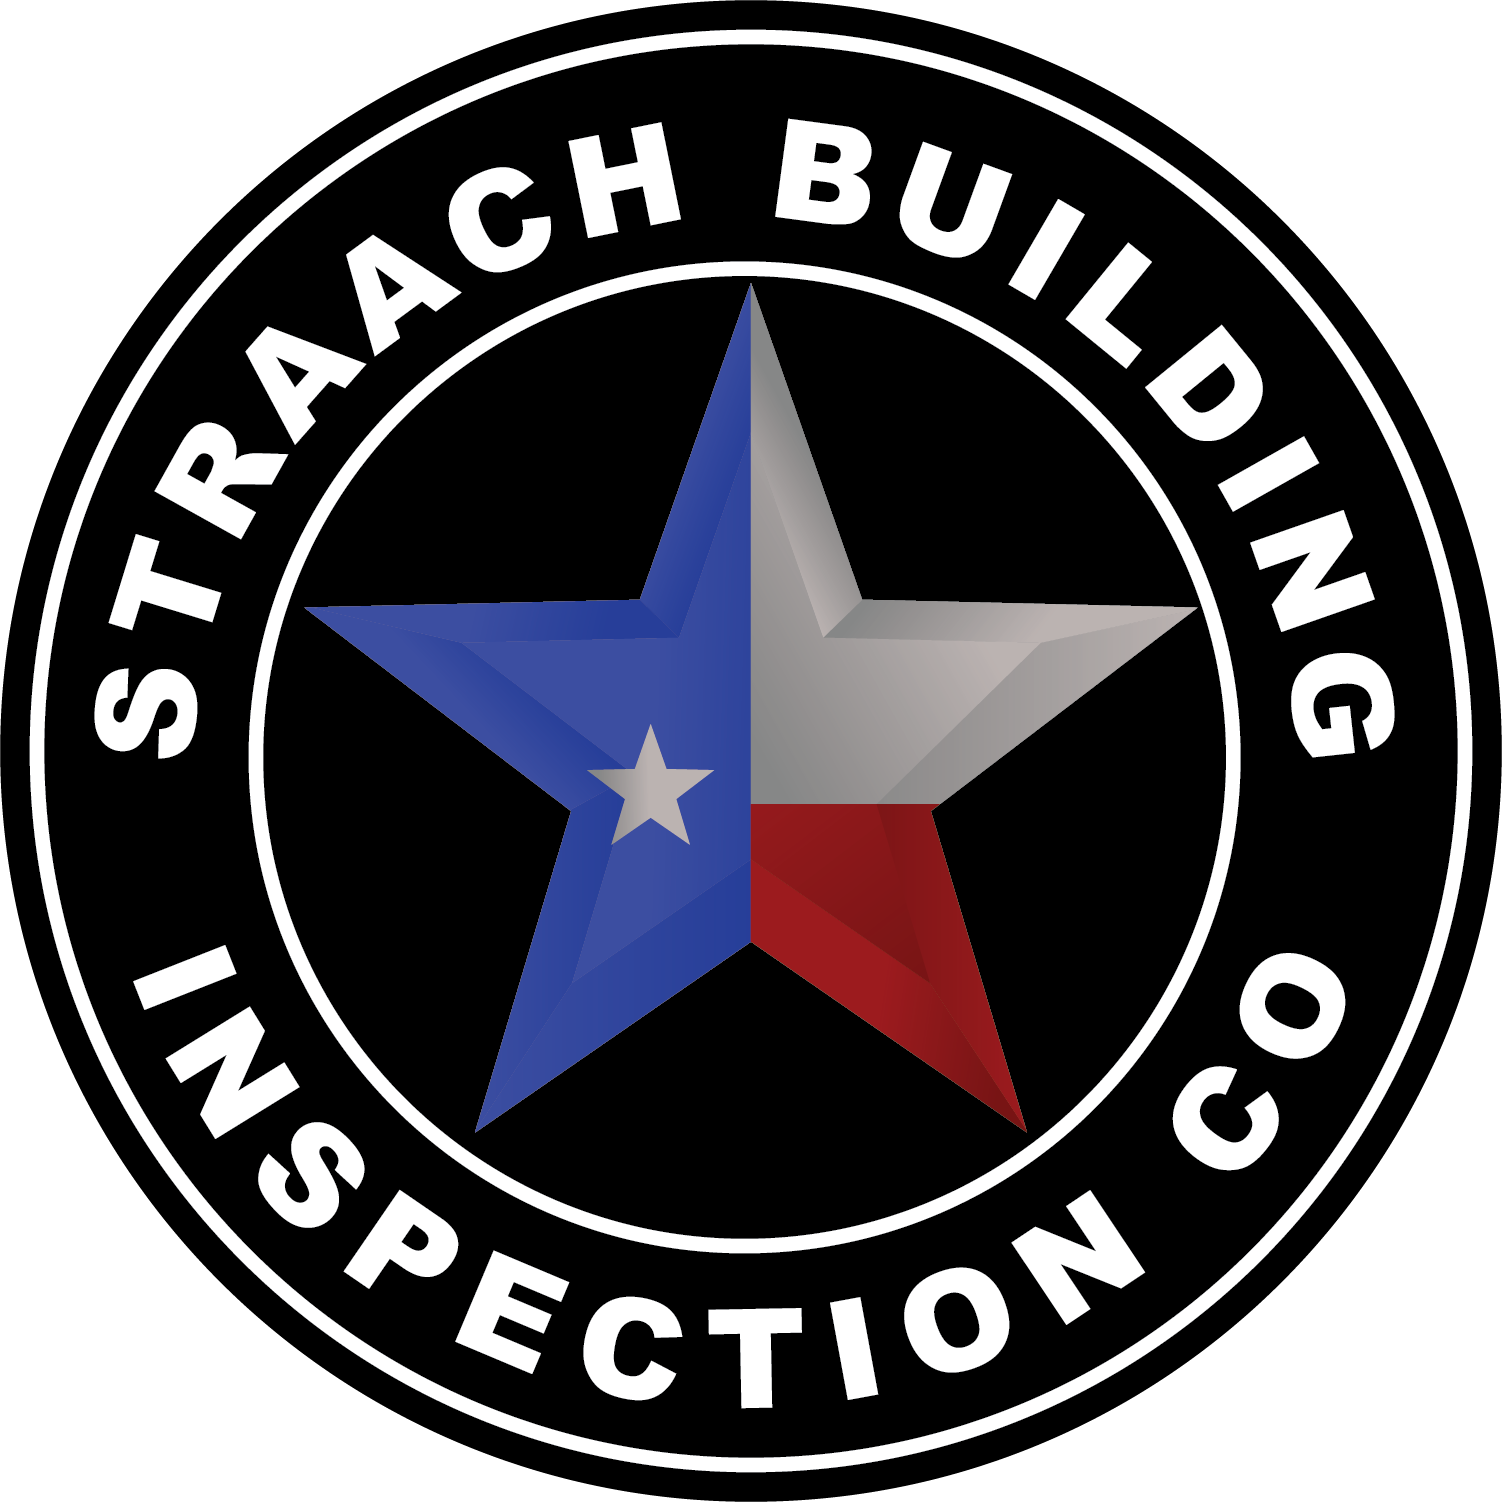 CX-92562_Straach Building Inspection Co_Black